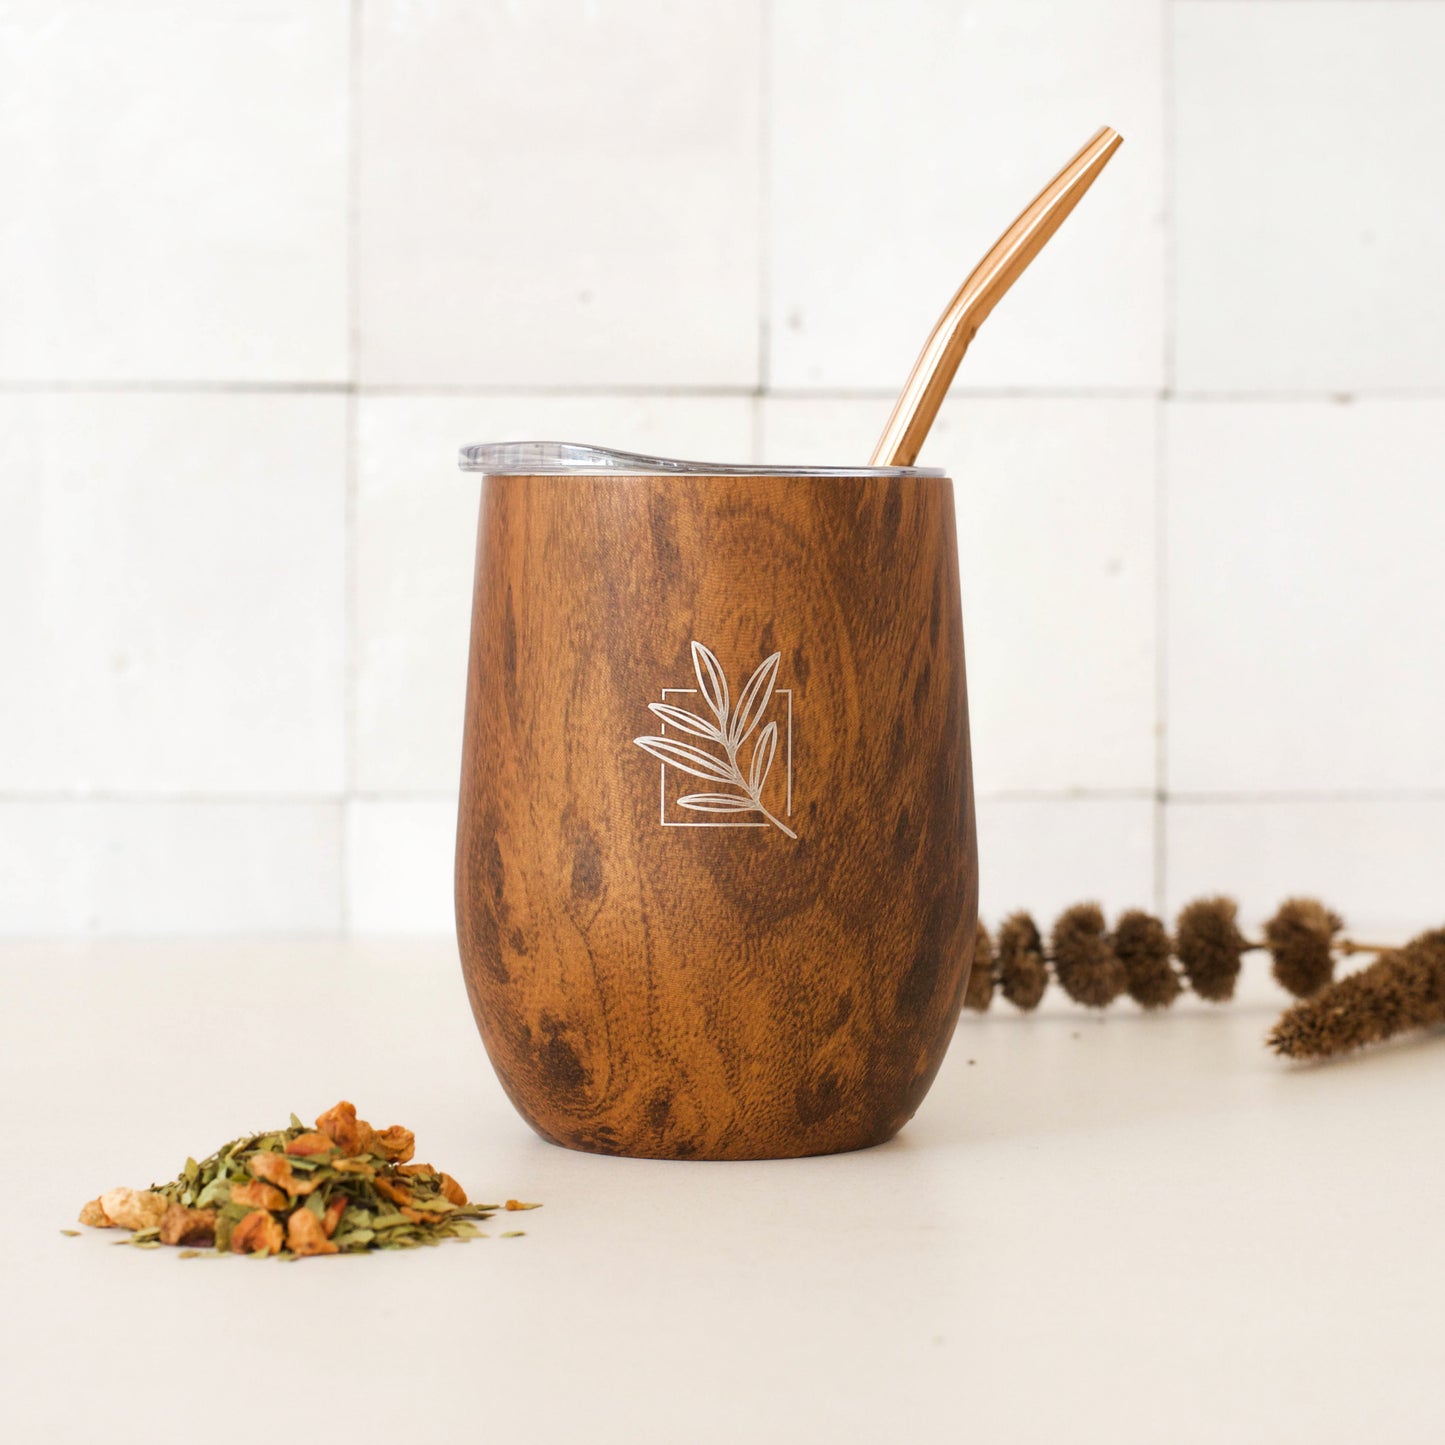 Wood effect insulated cup and its bombilla - for Mate, Tea or Coffee